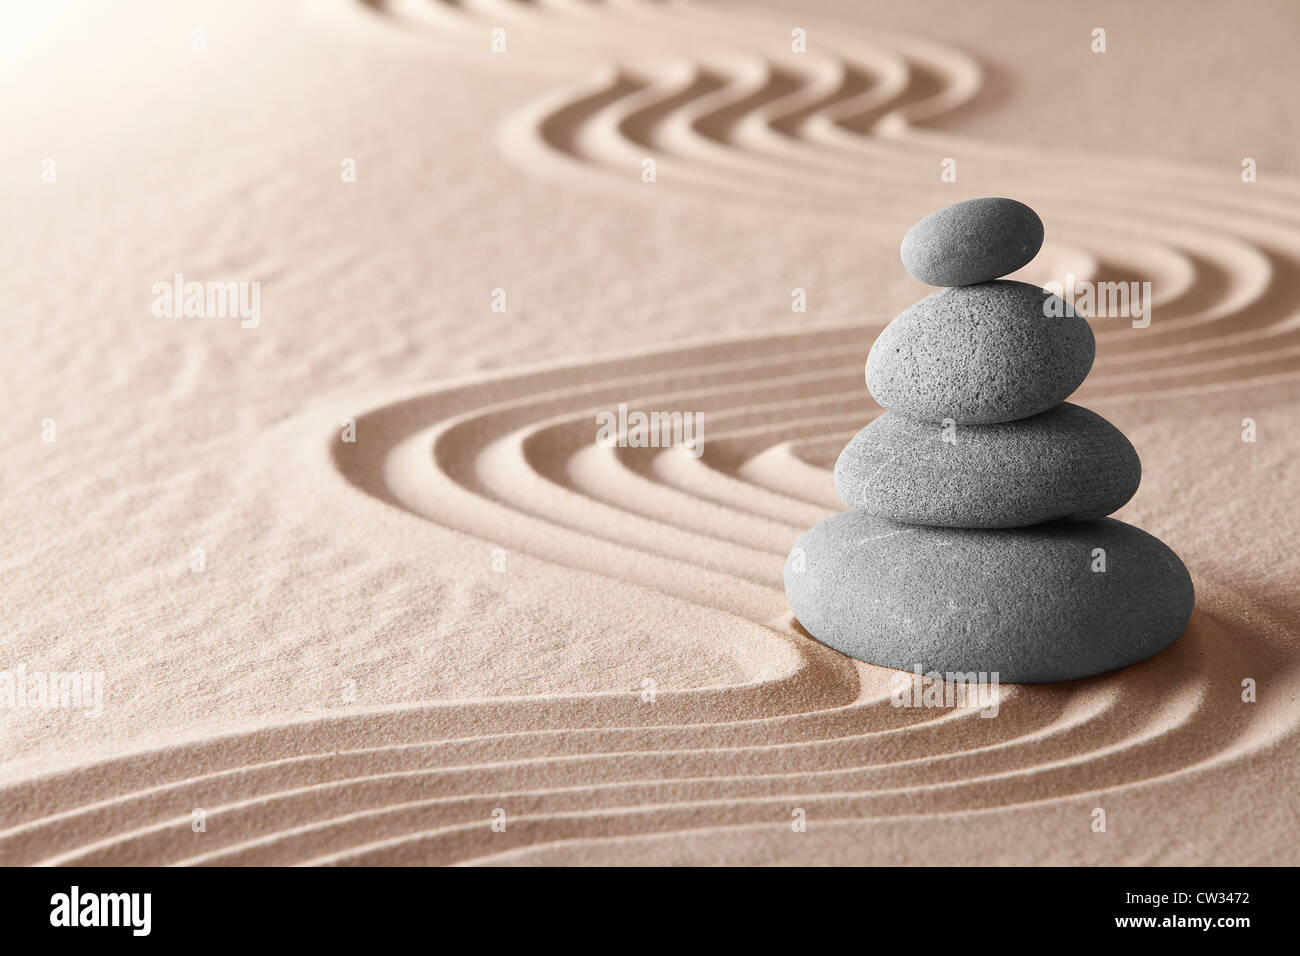 zen garden concept for balance and harmony, meditation stone and pattern of lines in sand, spiritual concentration and purity Stock Photo